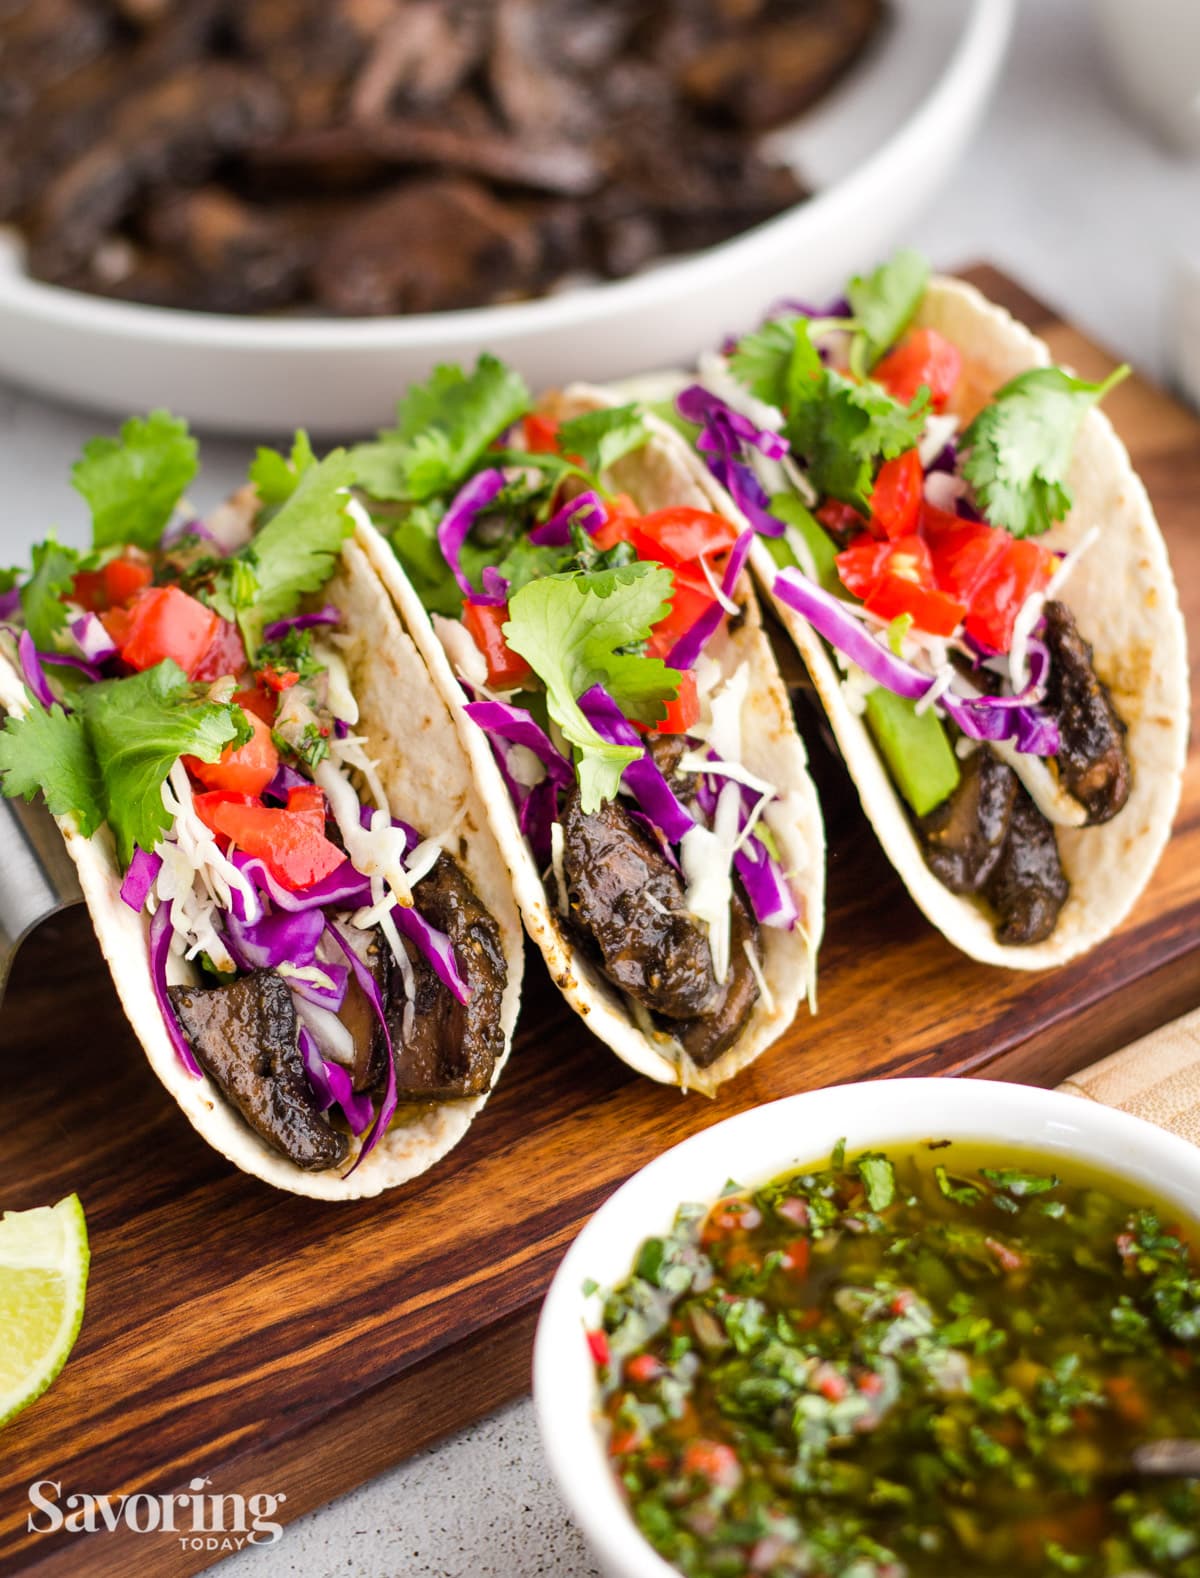 mushroom tacos with chimichurri, cabbage, tomatoes and cilantro